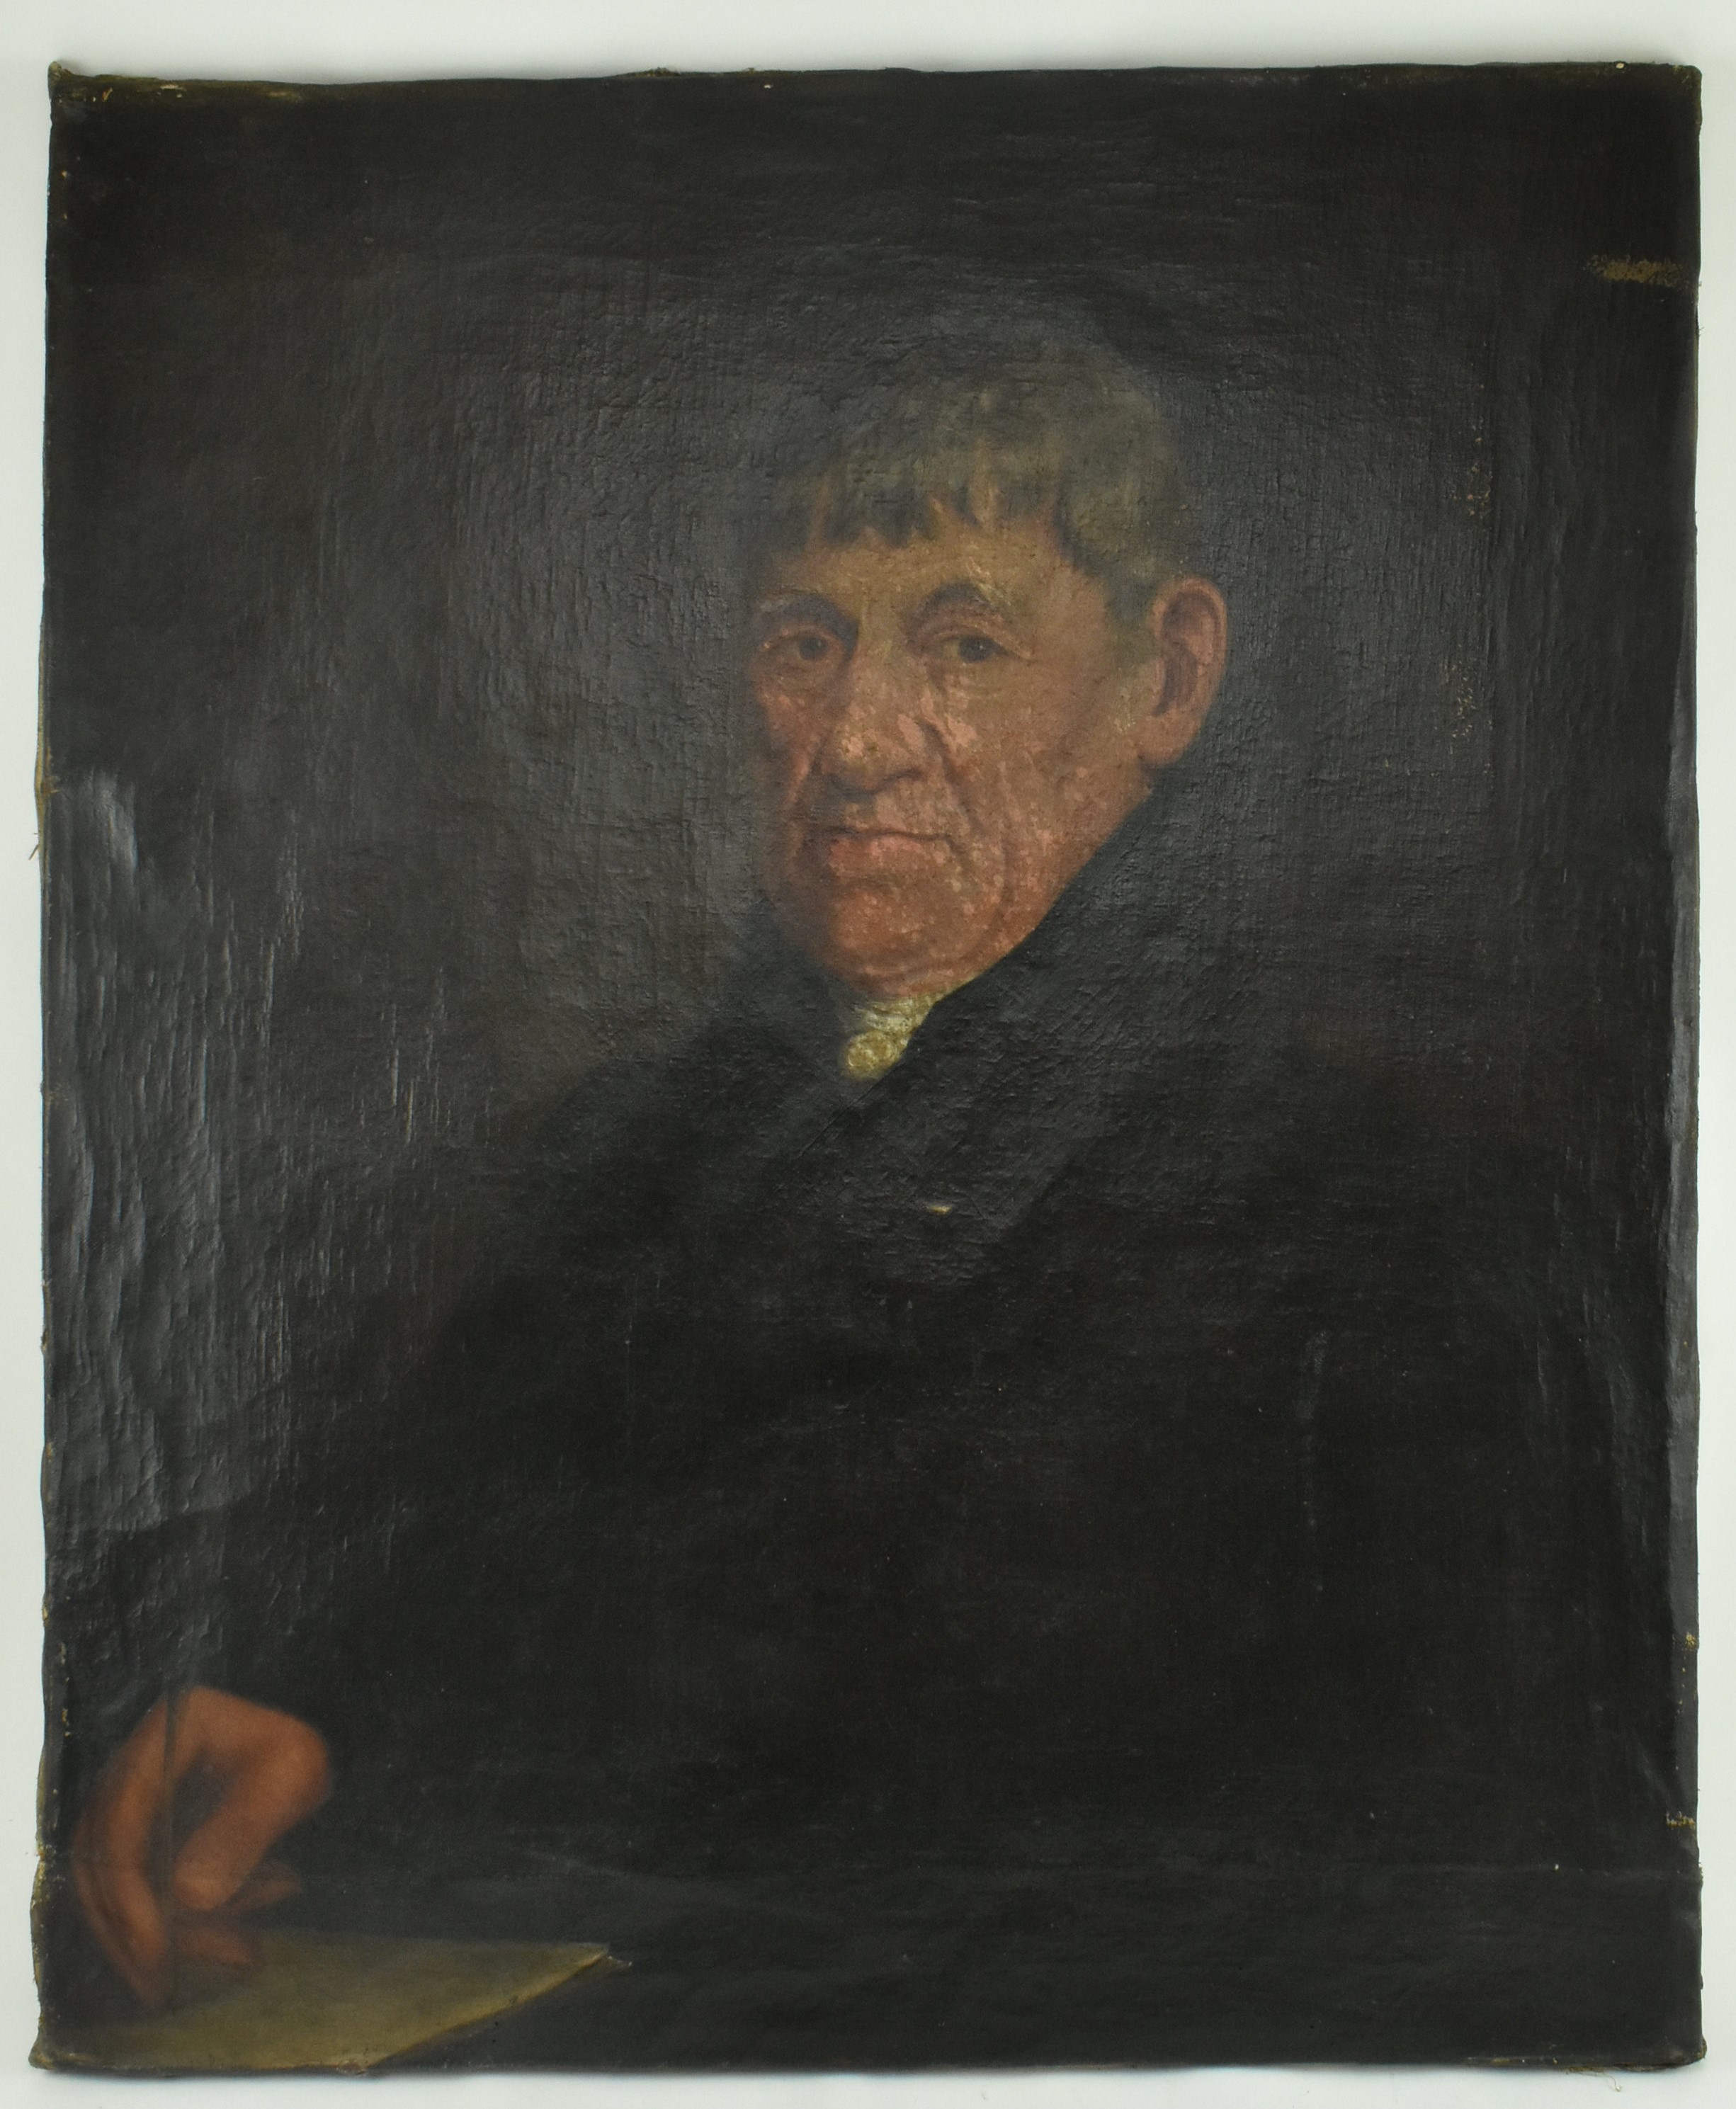 LATE 18TH / EARLY 19TH CENTURY OIL ON CANVAS PORTRAIT OF GENT